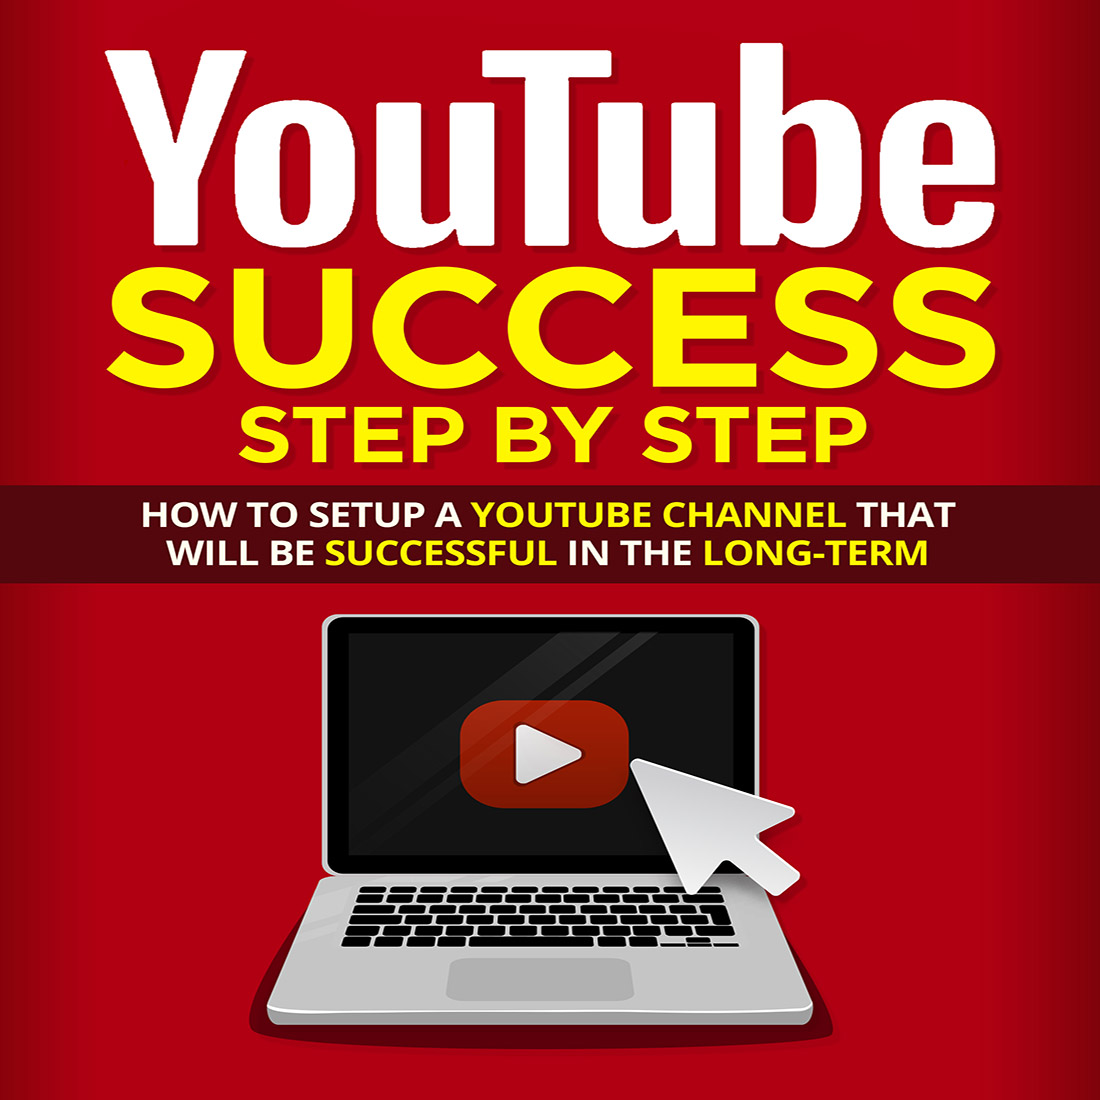 YouTube Success Step By Step preview image.